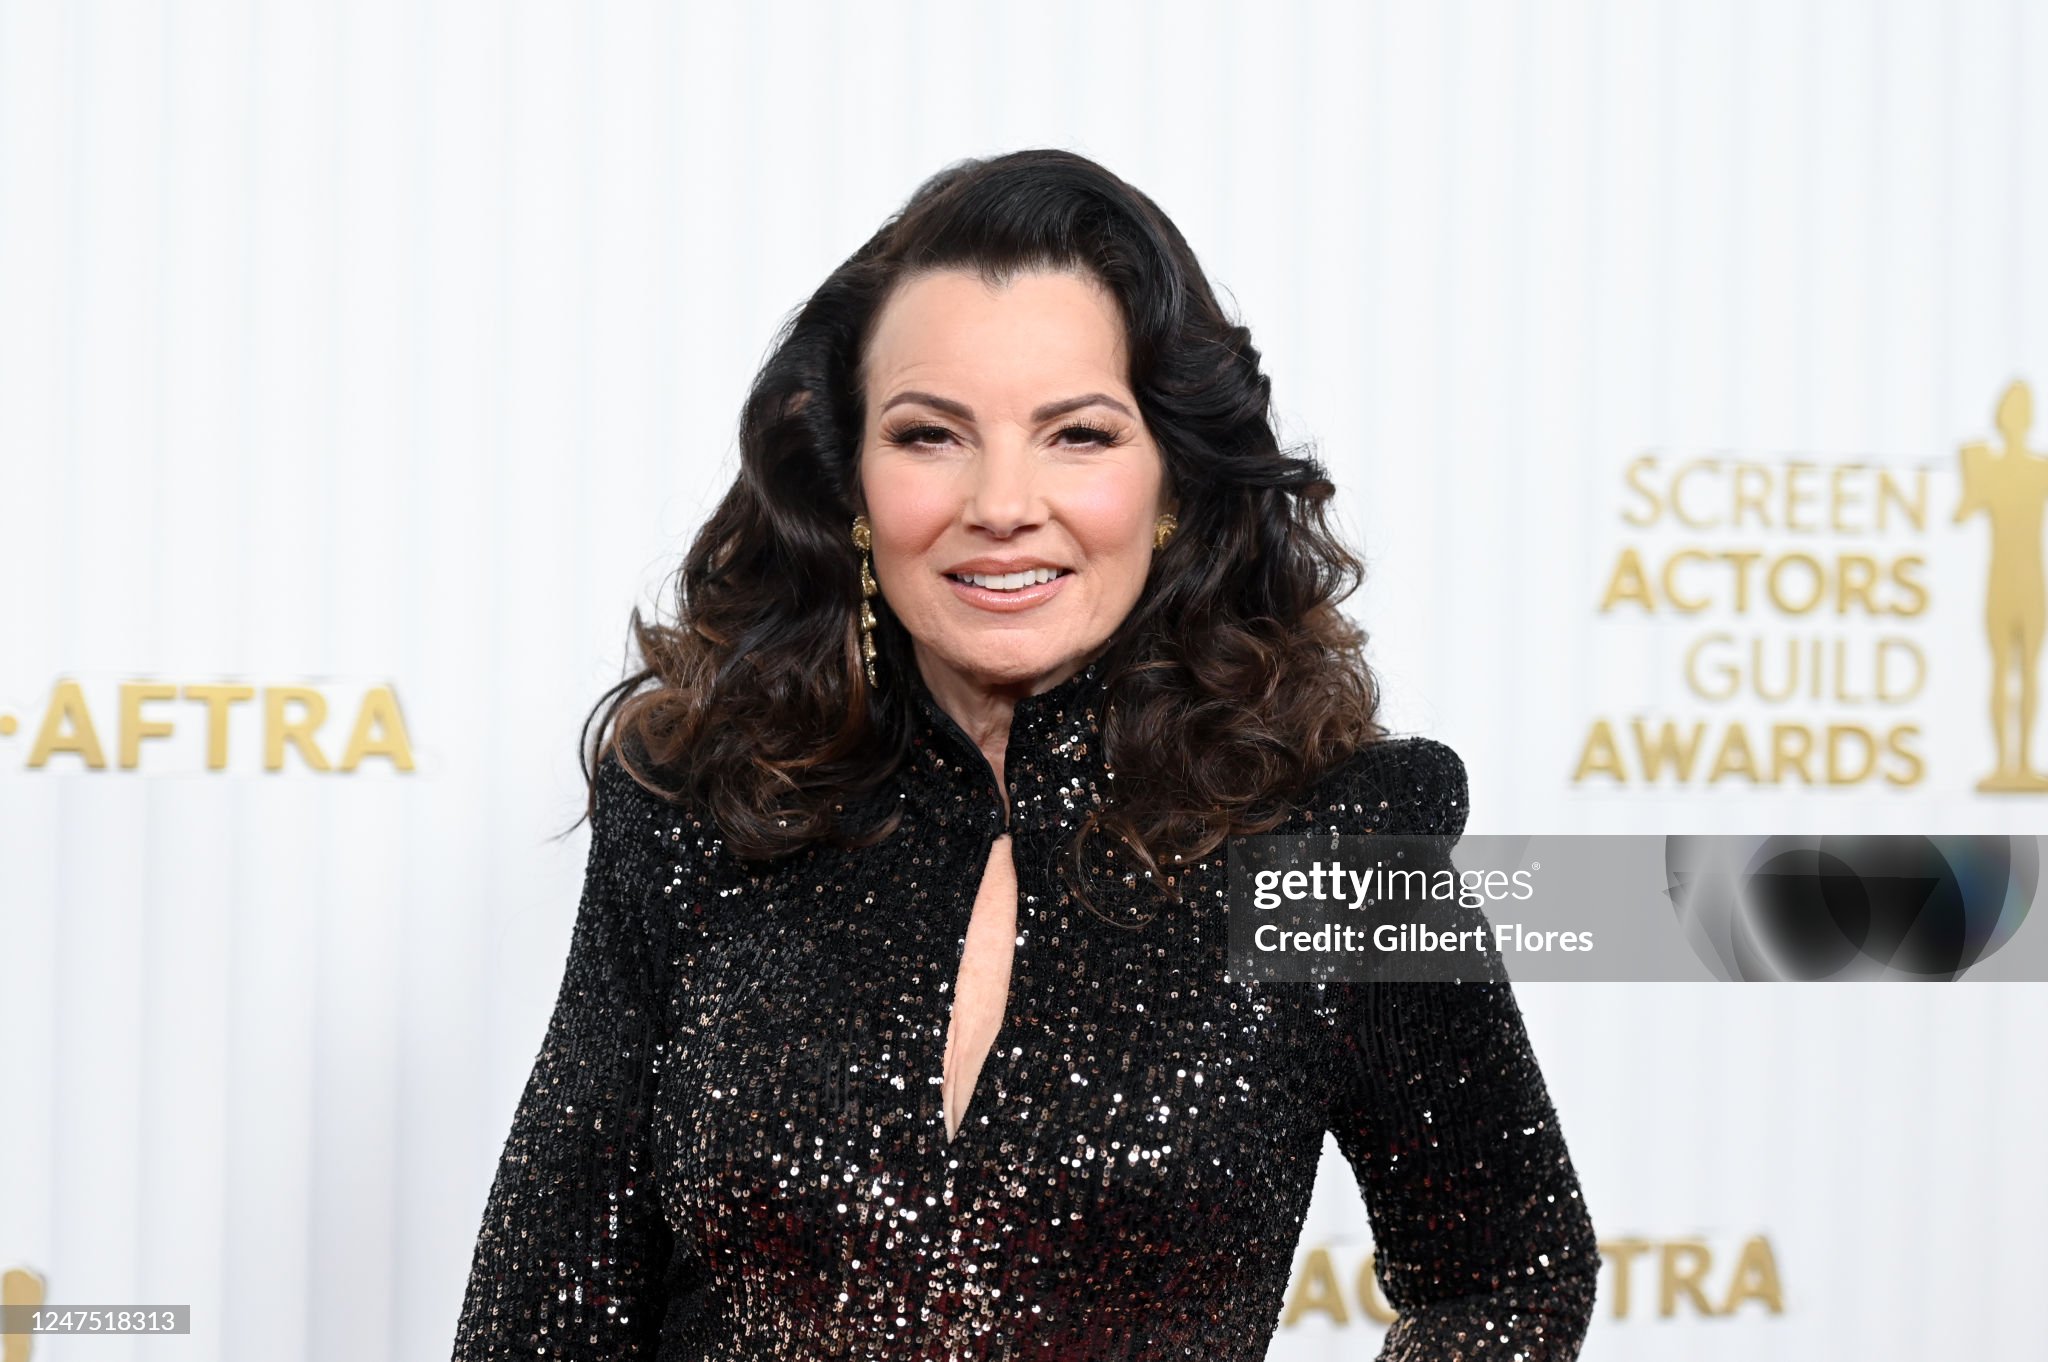 fran-drescher-at-the-29th-annual-screen-actors-guild-awards-held-at-the-fairmont-century-plaza.jpg